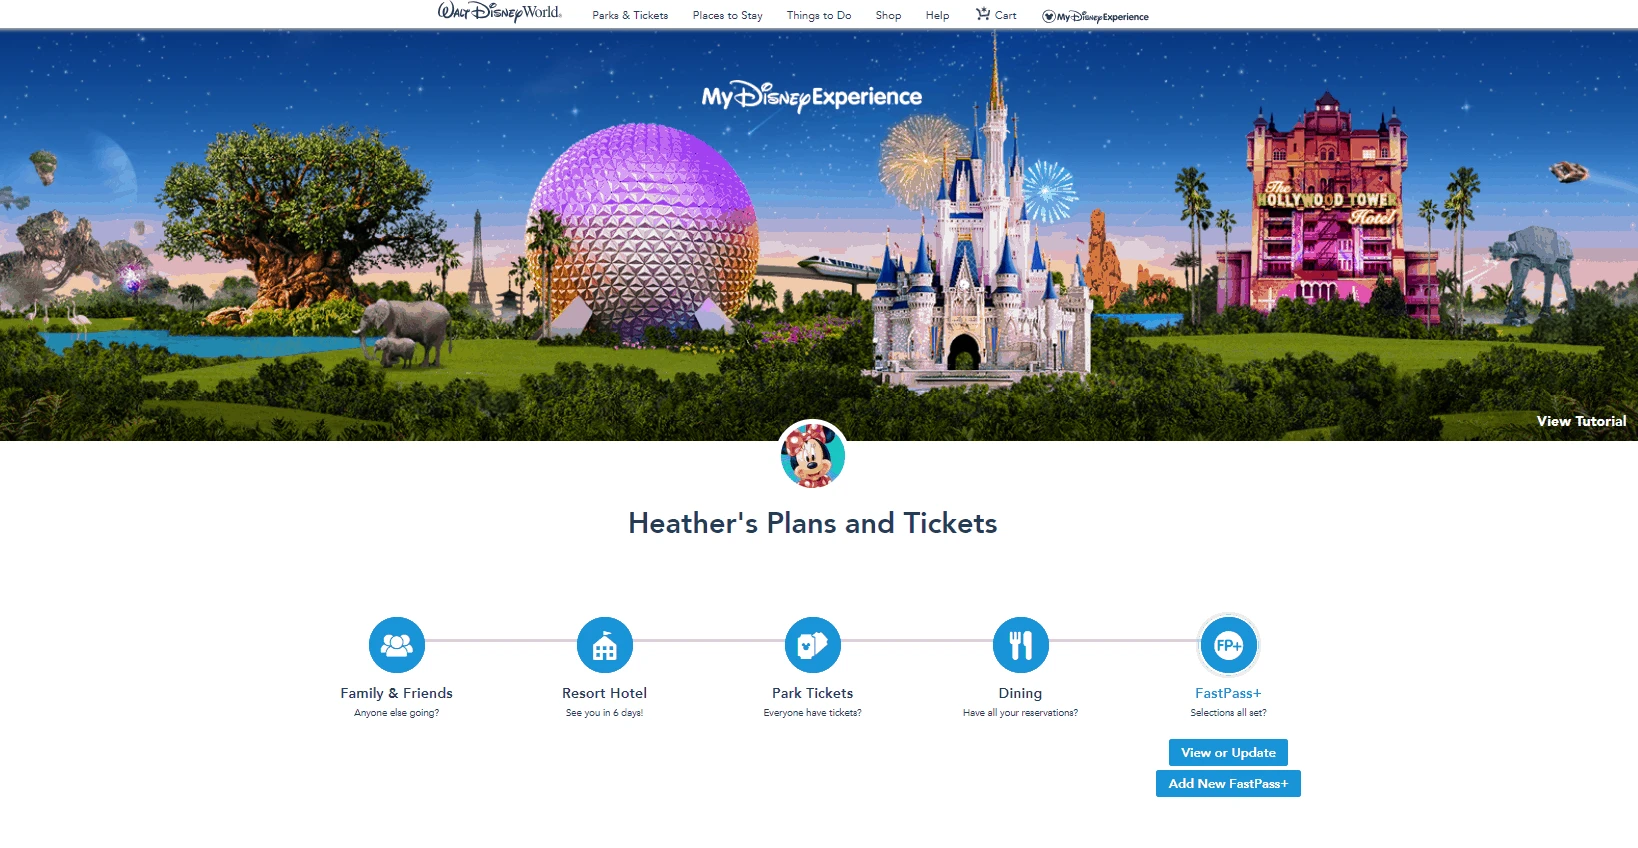 FastPass+ in My Disney Experience